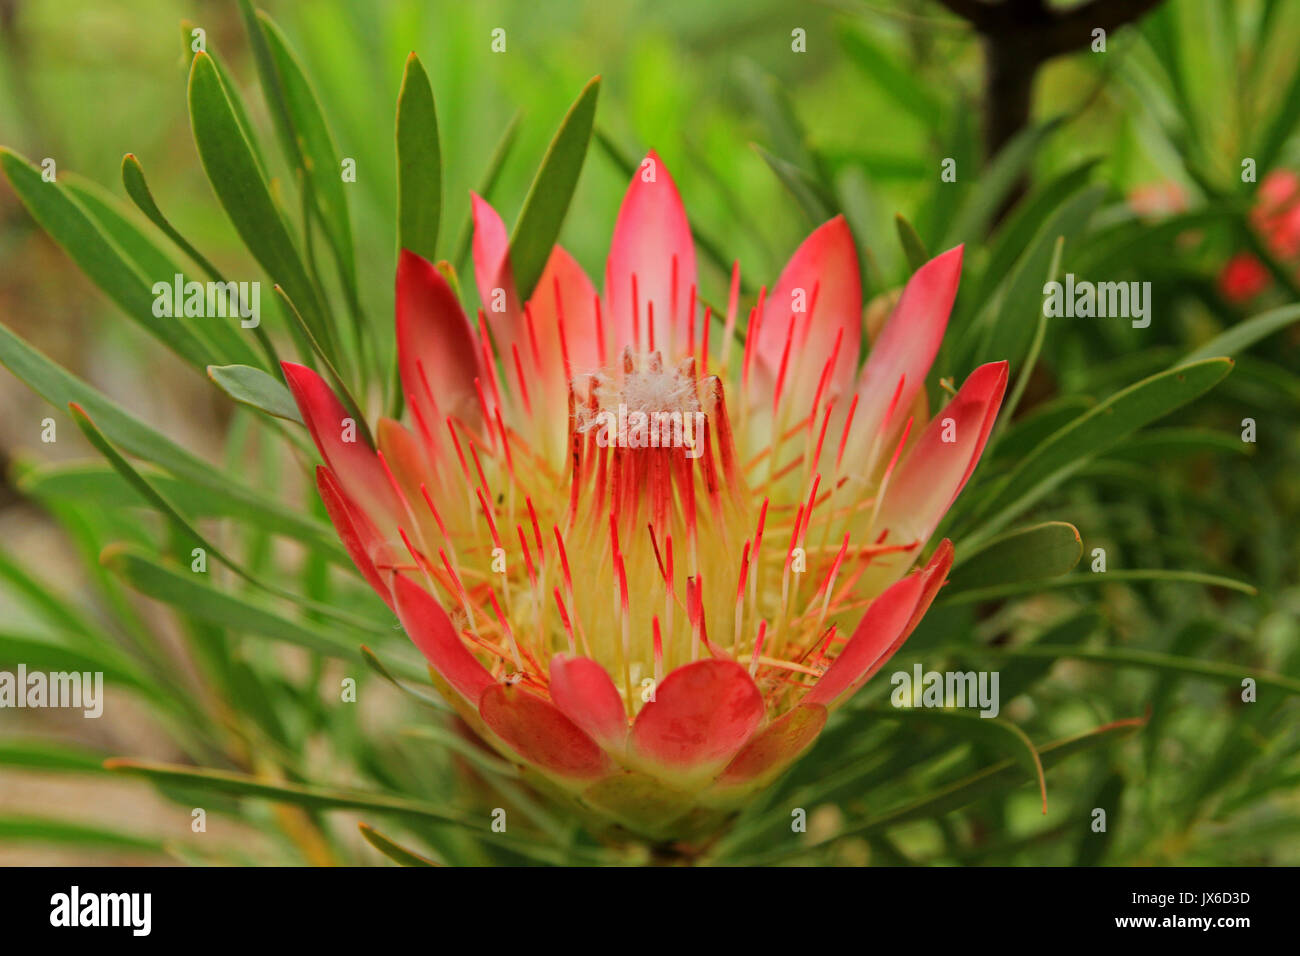 Protea, national flower of South Africa, Kirstenbosch National Botanical Garden, Cape Town, South Africa Stock Photo